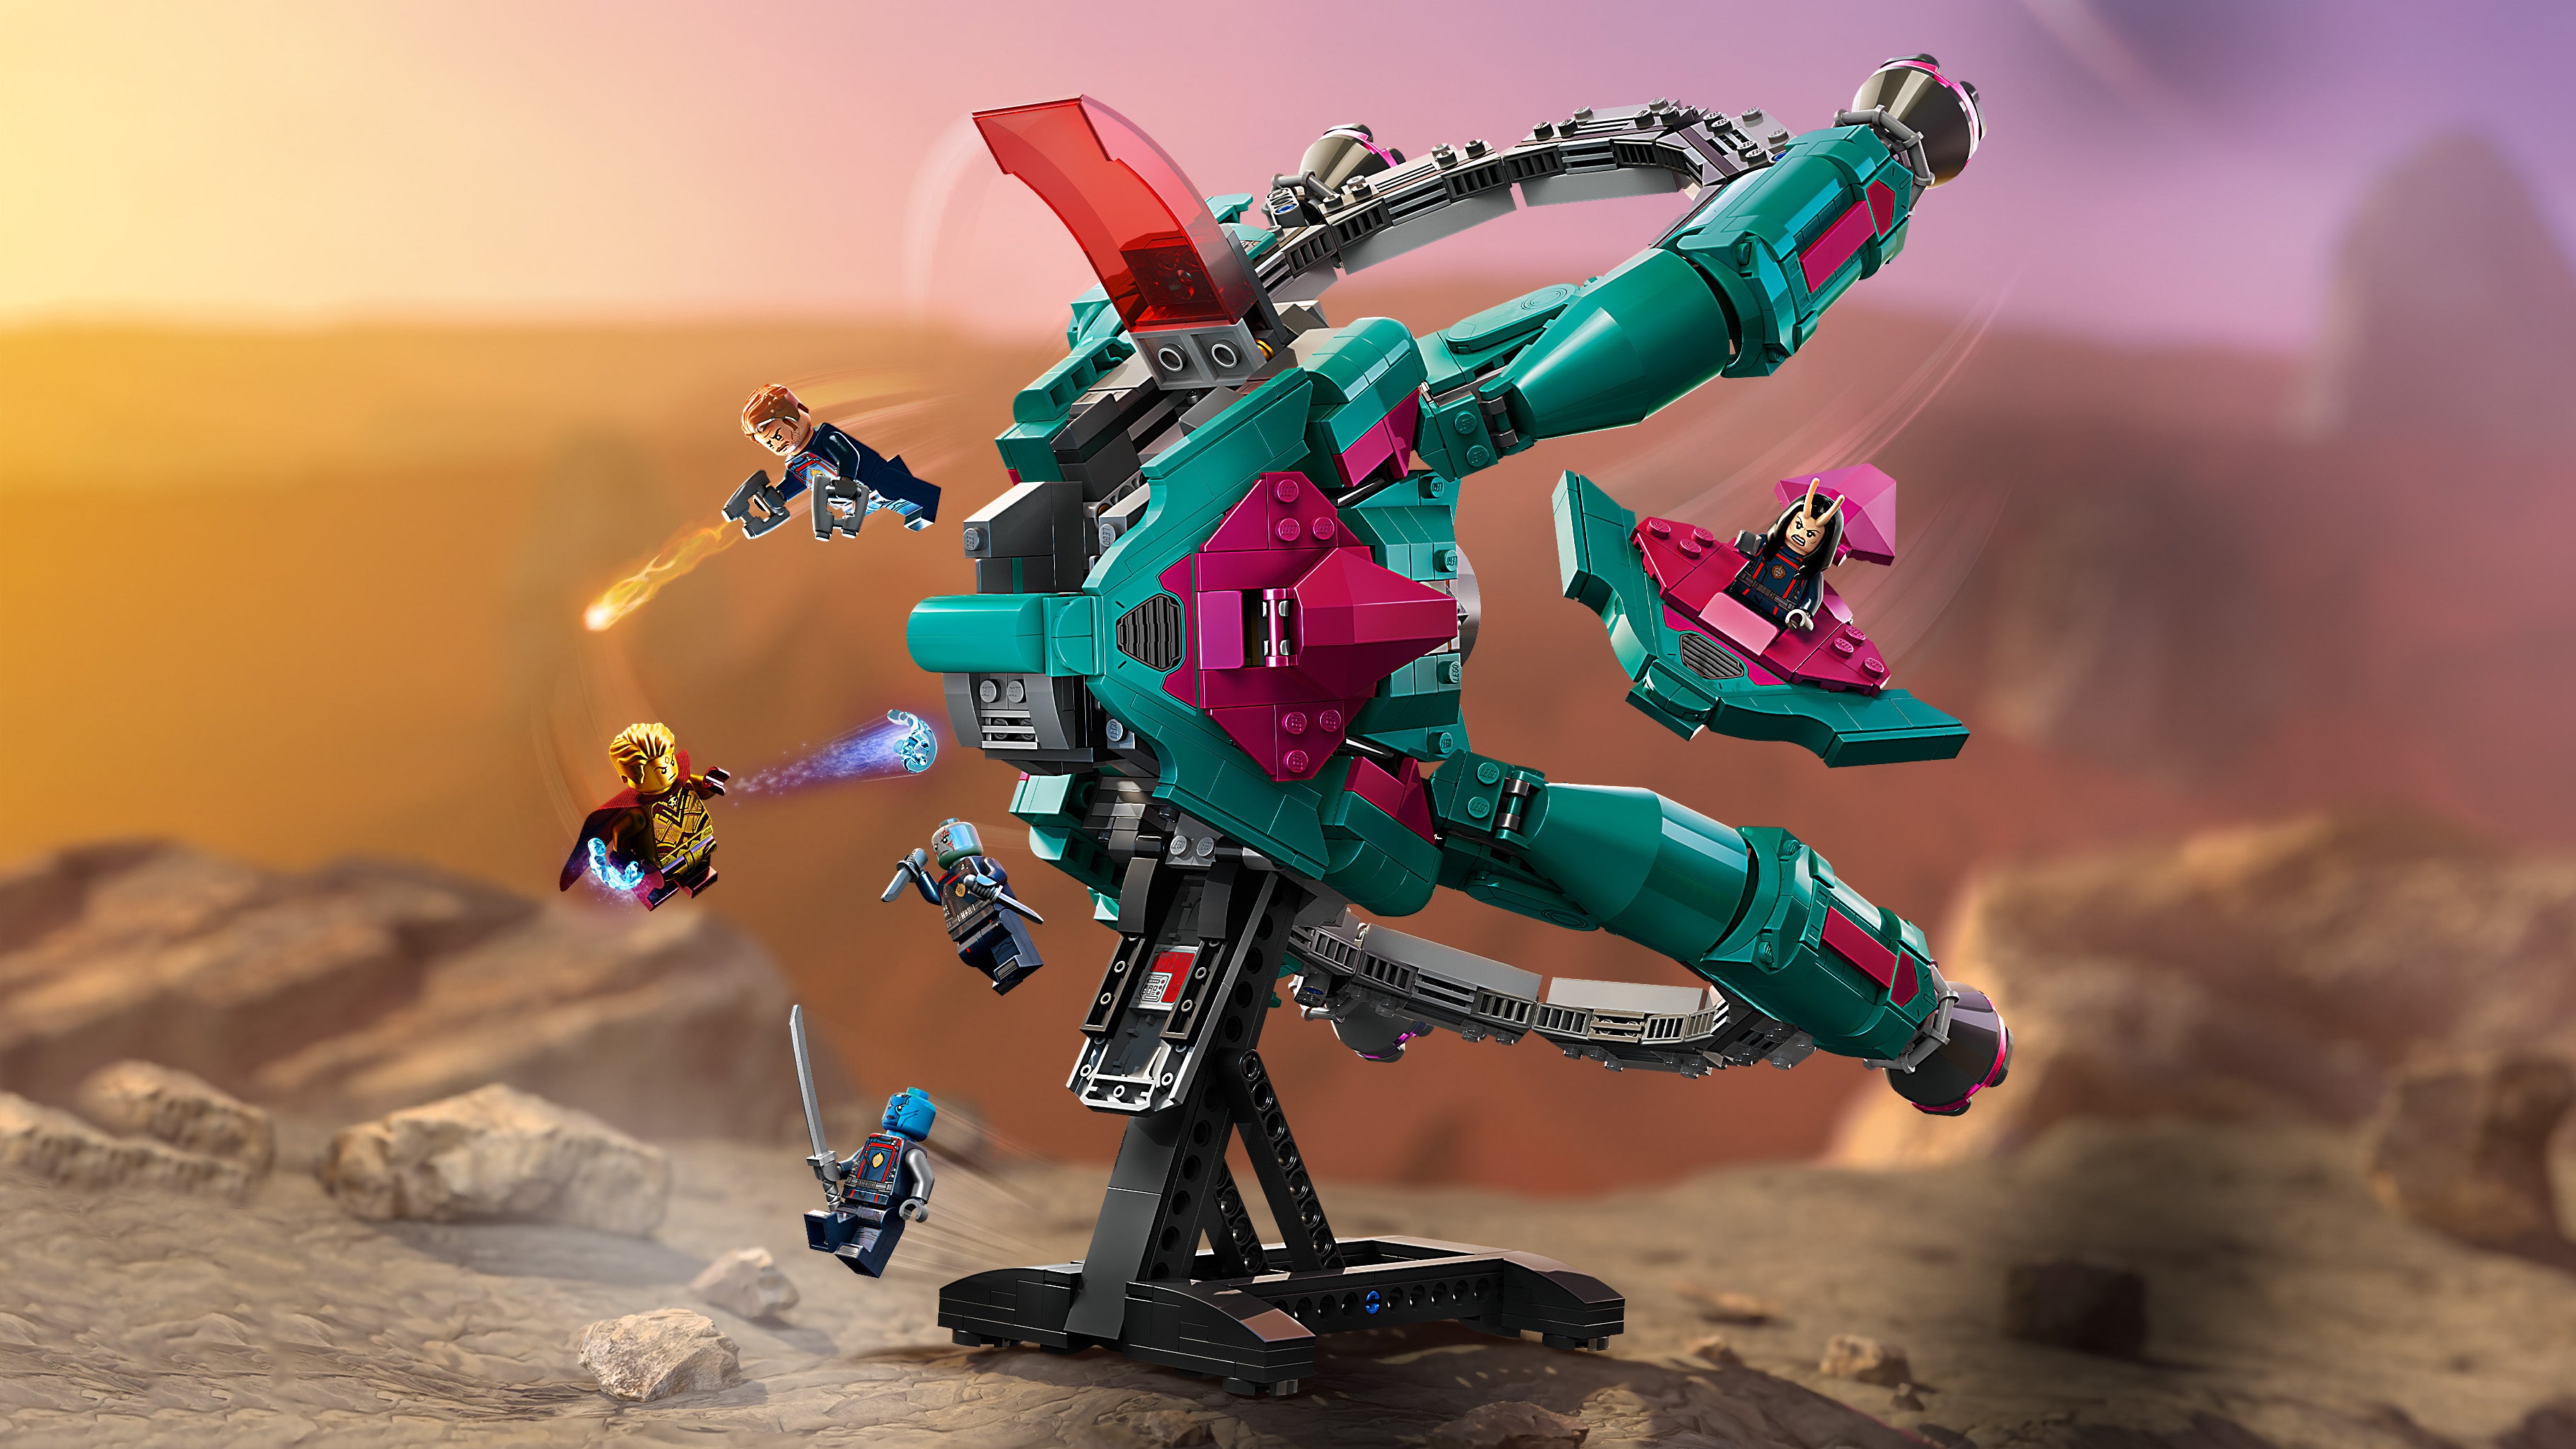 Lego 76255 The New Guardians Ship